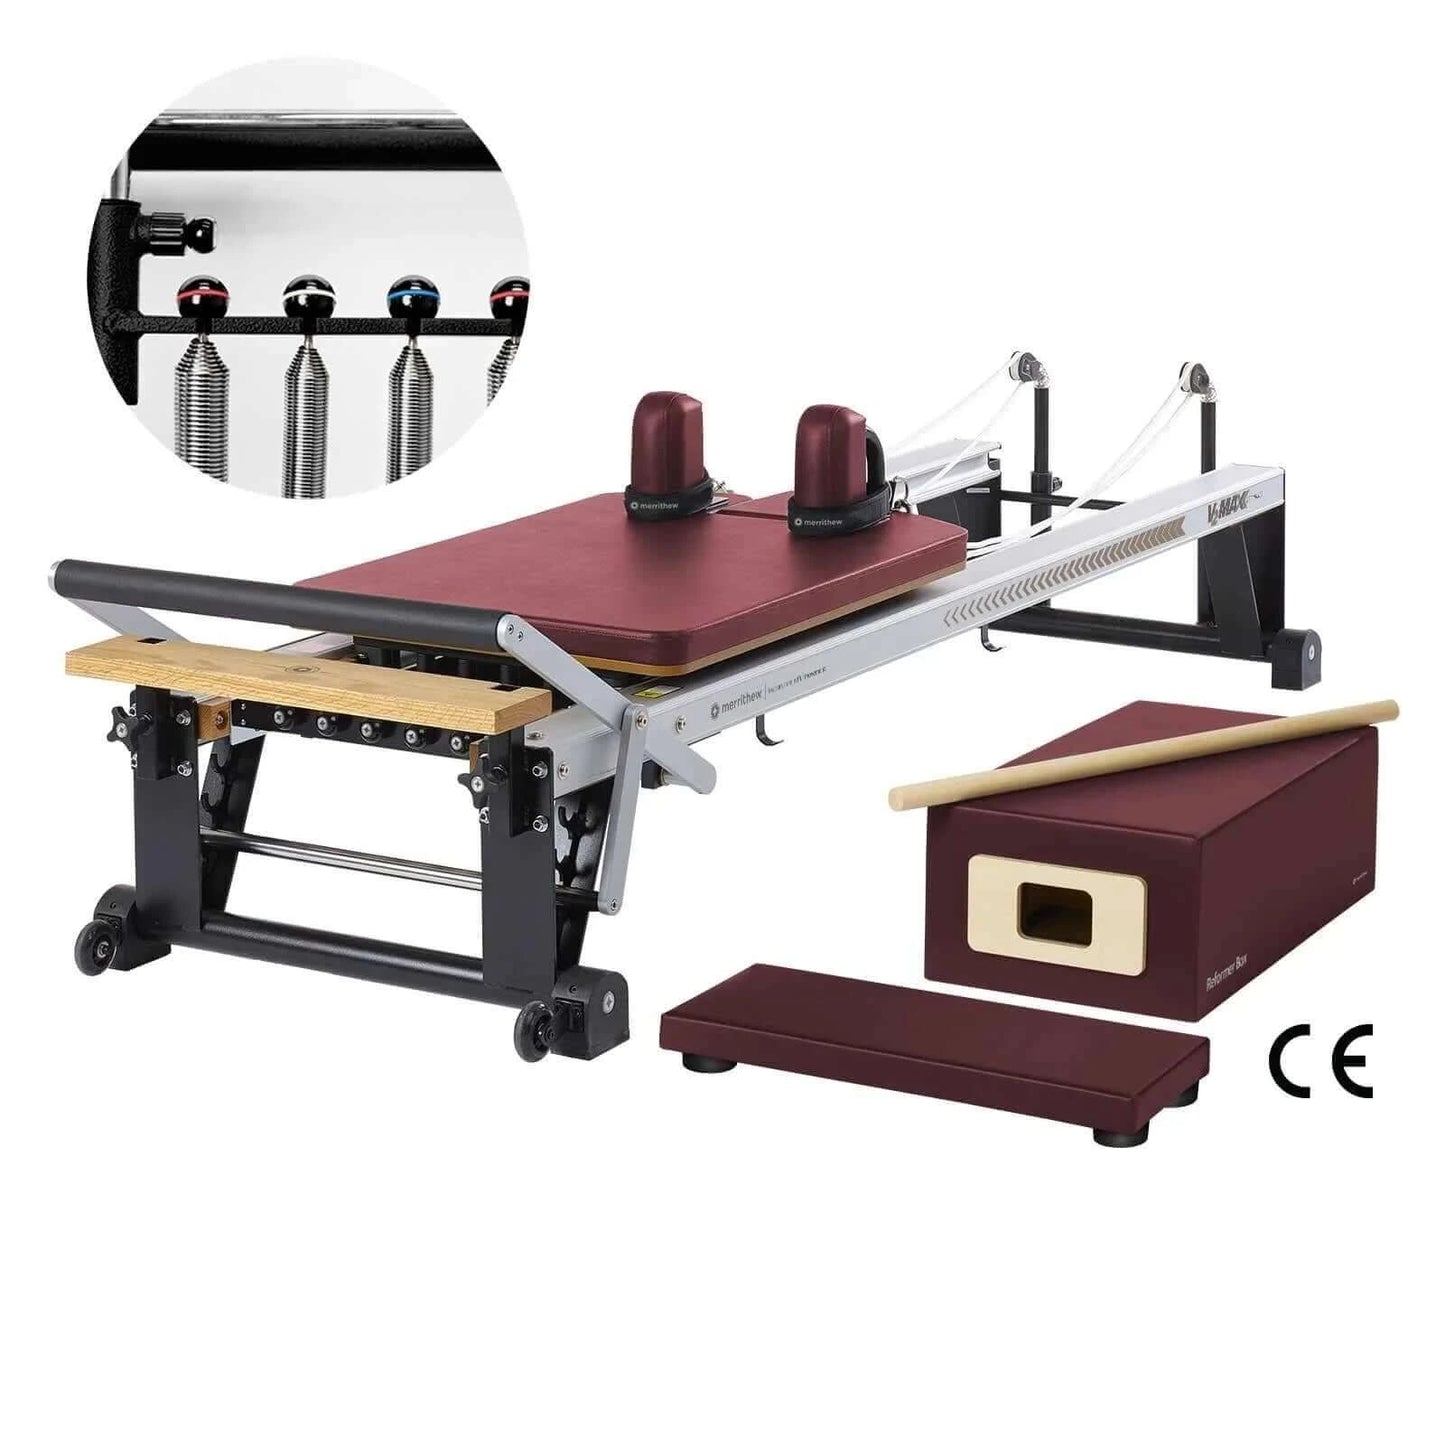 Red Truffle Merrithew™ Pilates V2 Max™ Reformer Bundle with High-Precision Gearbar